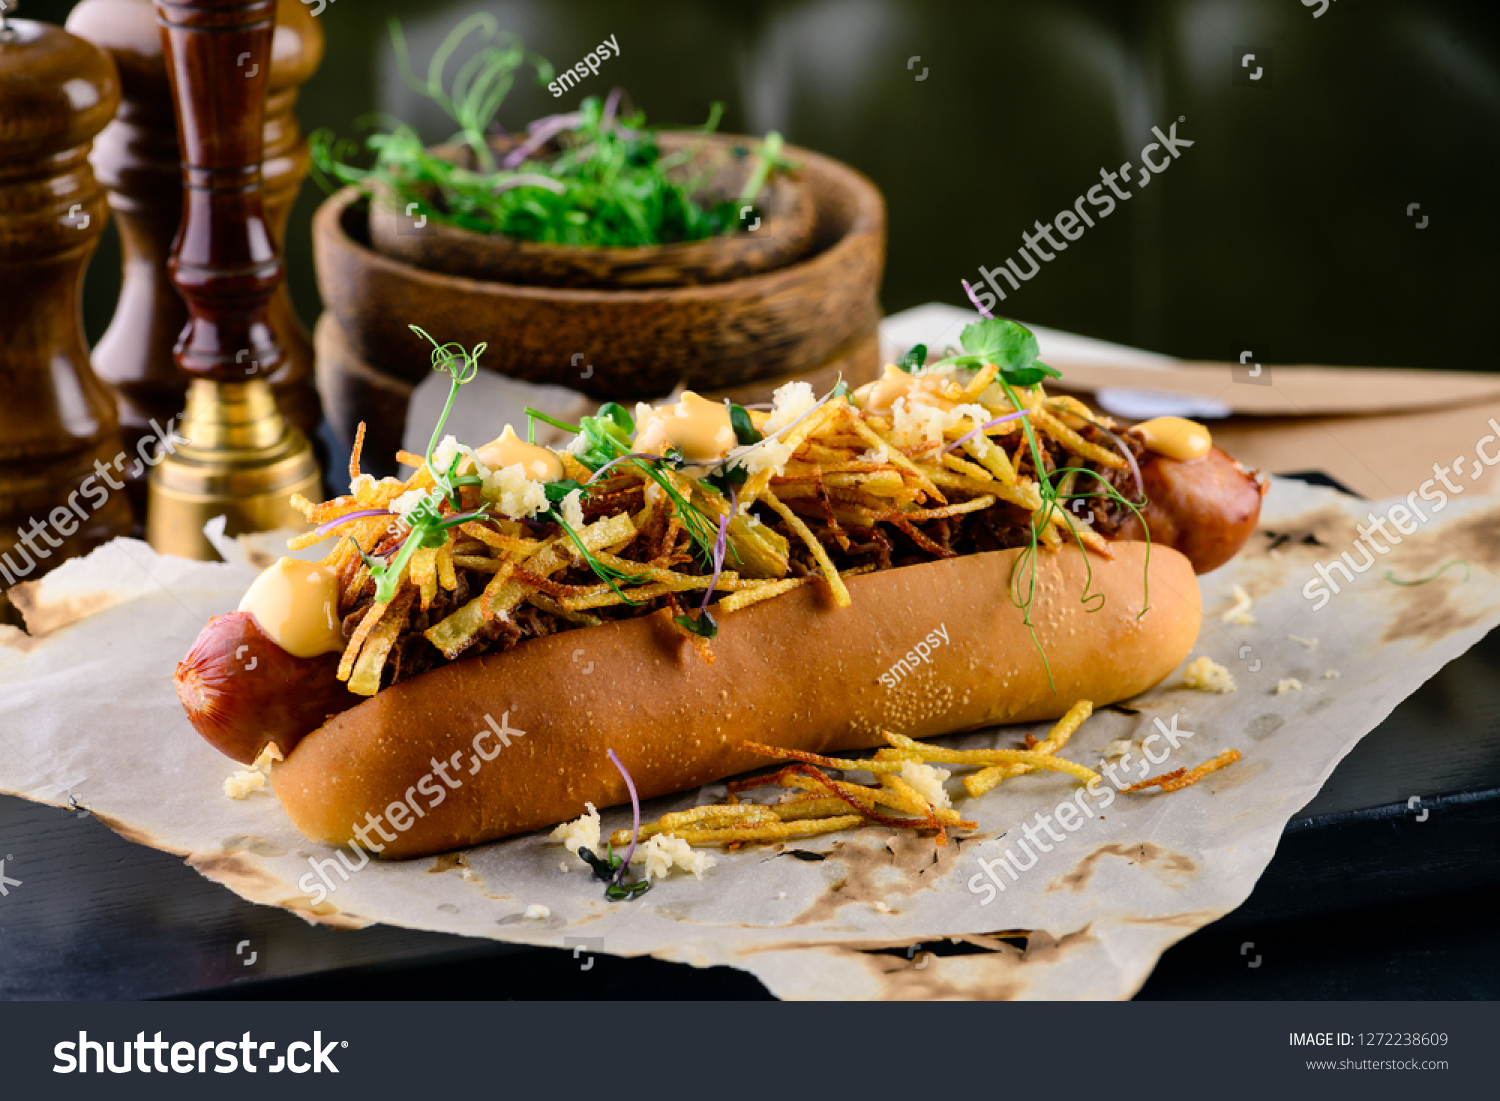 Delicious grilled hotdog in a restaurant, Homemade Bacon Wrapped Hot Dogs with Onions and Peppers #1272238609